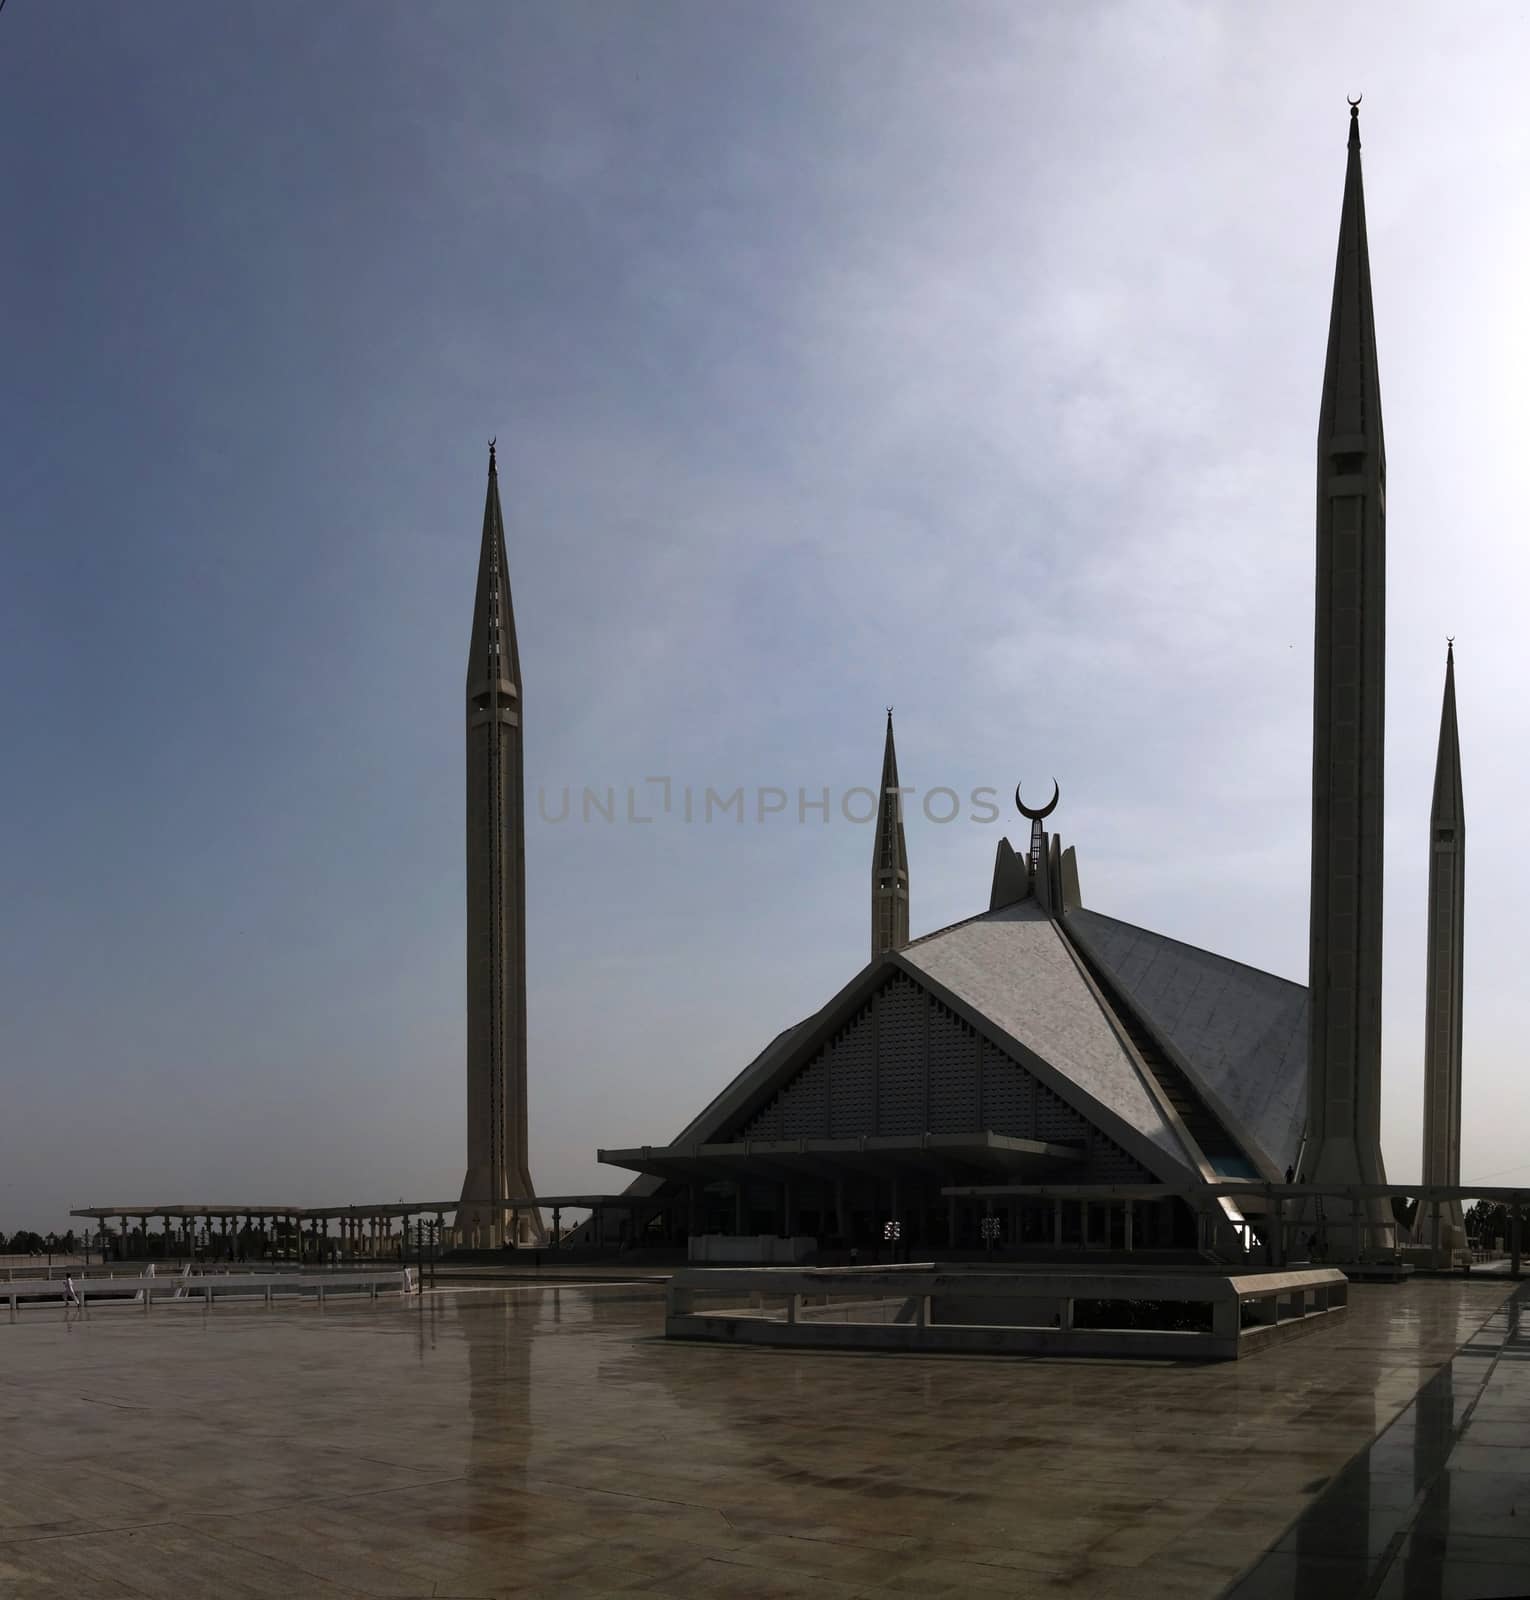 Faisal Mosque in Islamabad capital of Pakistan by homocosmicos